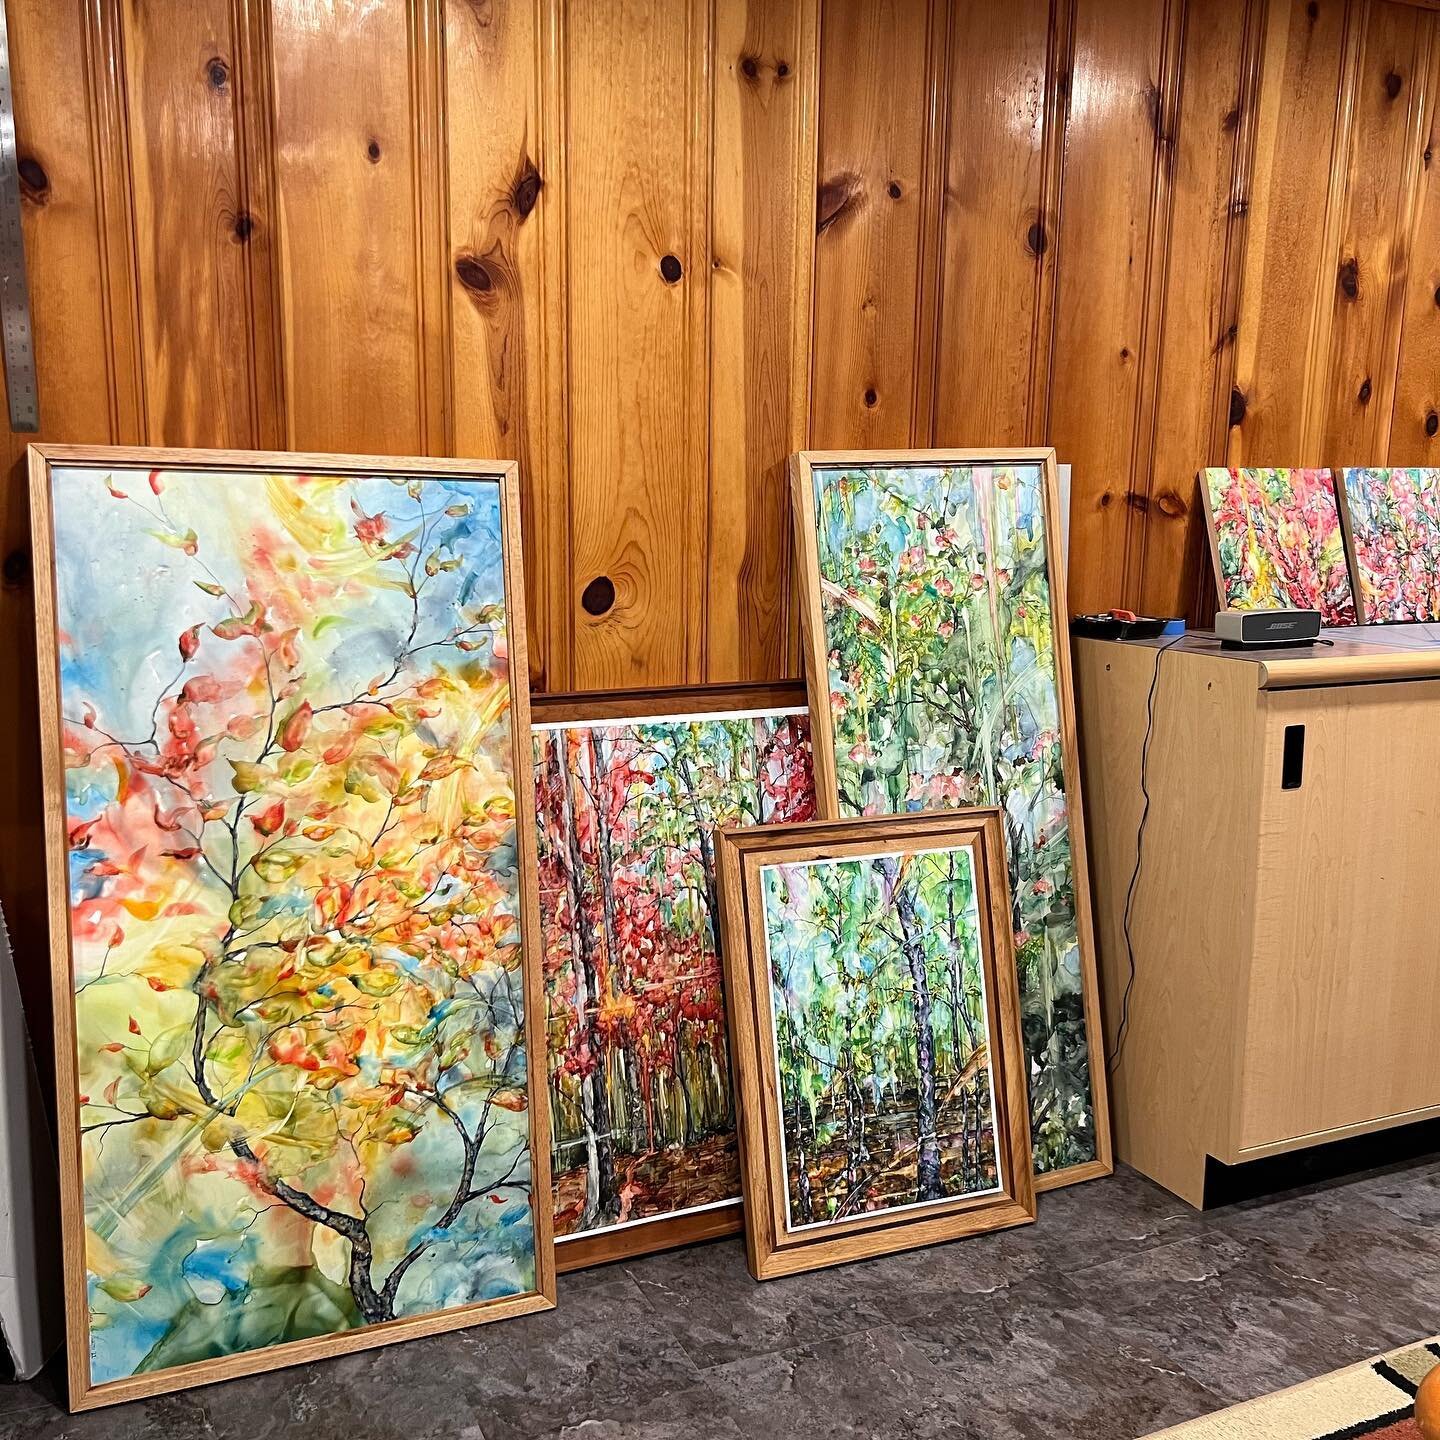 Working overtime in the studio getting ready for @stlartfair &hellip;so many hours go into these final stages of preparation. From sanding and staining framework, mounting hardware and cataloging finished work, all the time thinking about the next pa